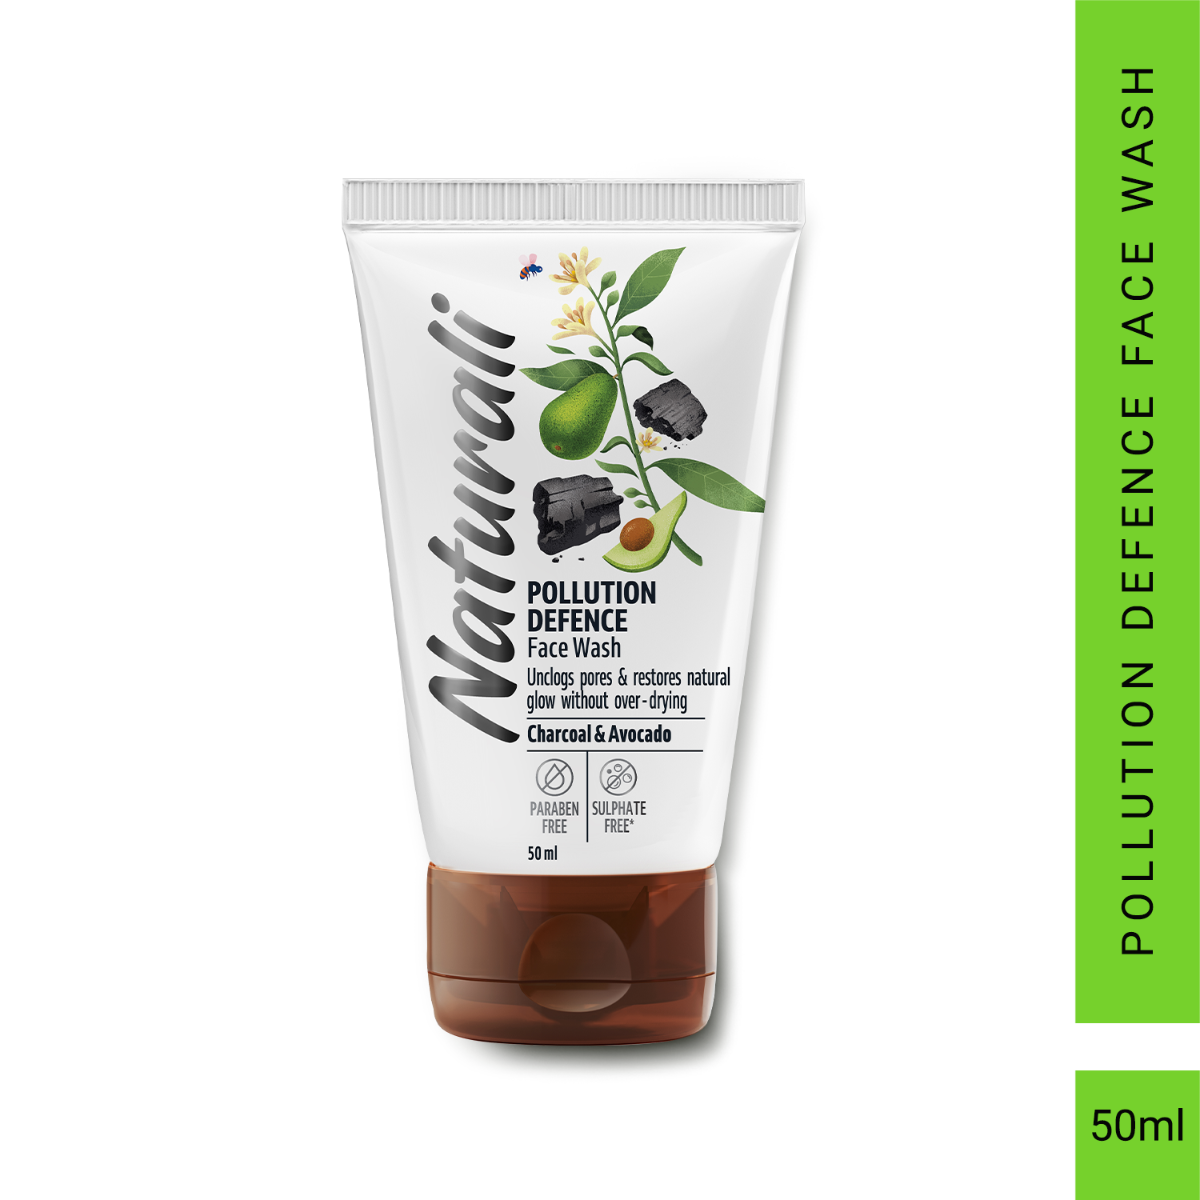 Naturali Pollution Defence Face Wash 50Ml With Charcoal & Avocado Protects Skin From Pollution And Restores Natural Glow